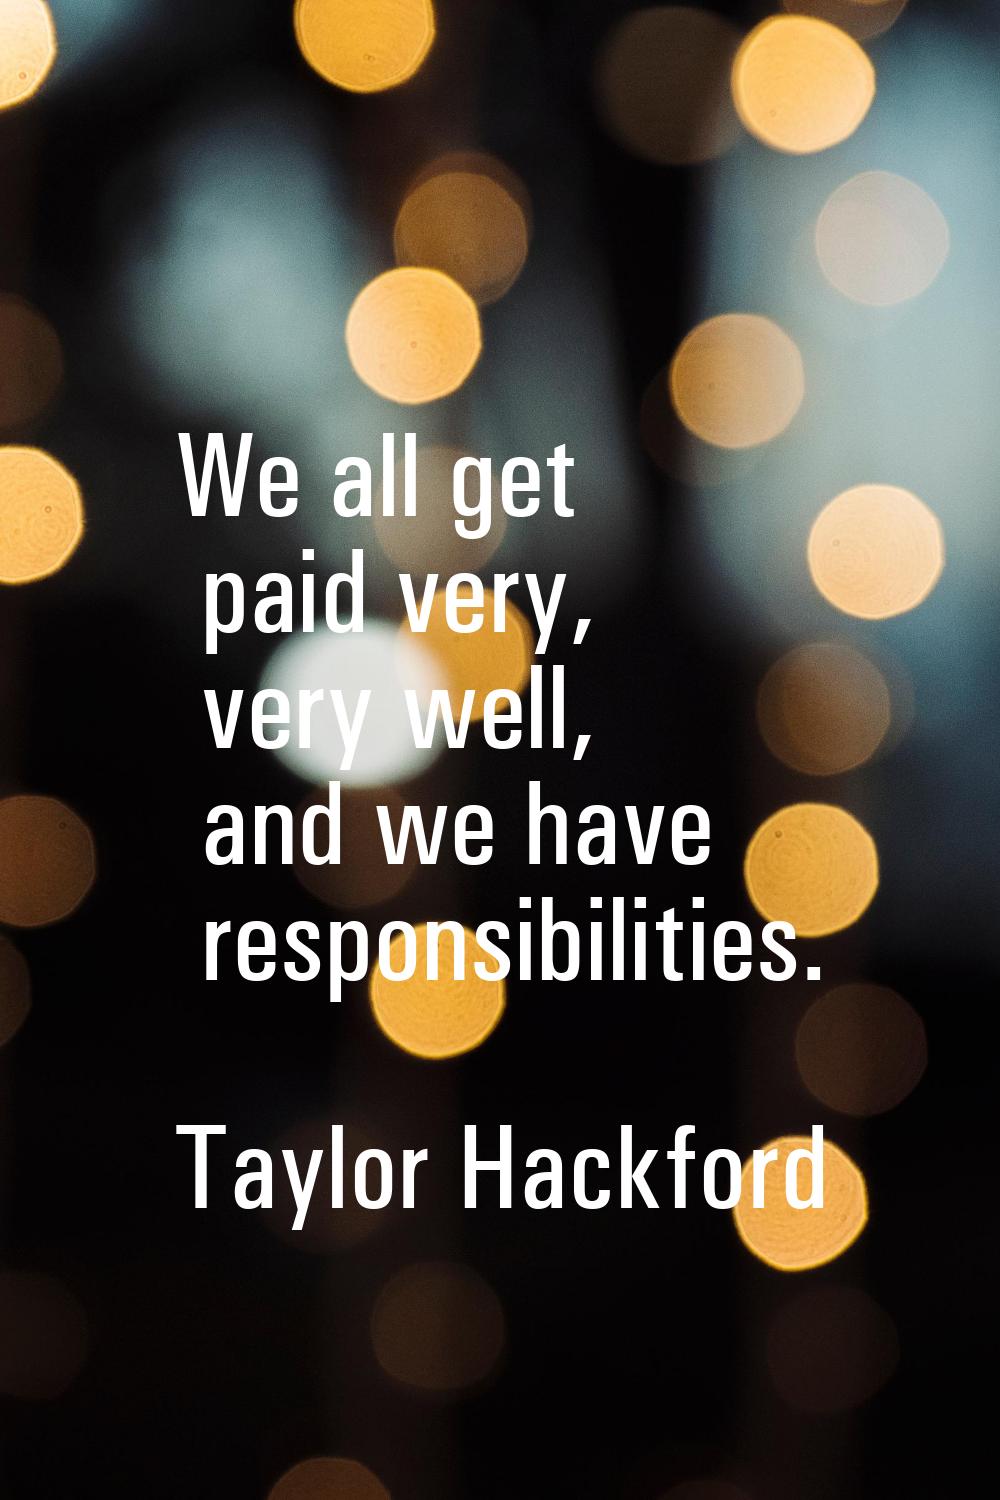 We all get paid very, very well, and we have responsibilities.